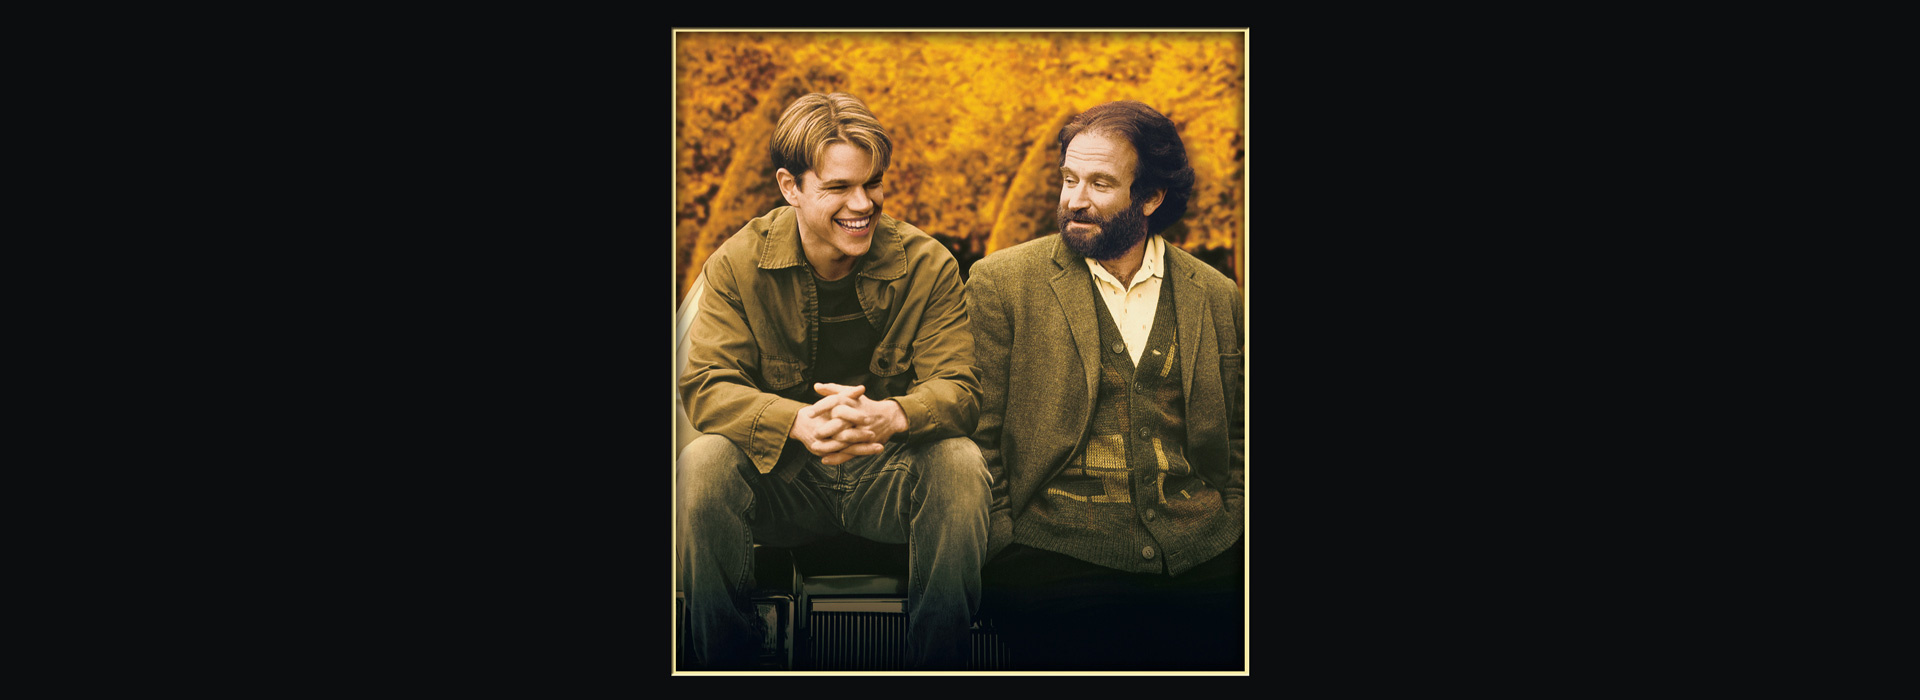 Movie poster Good Will Hunting